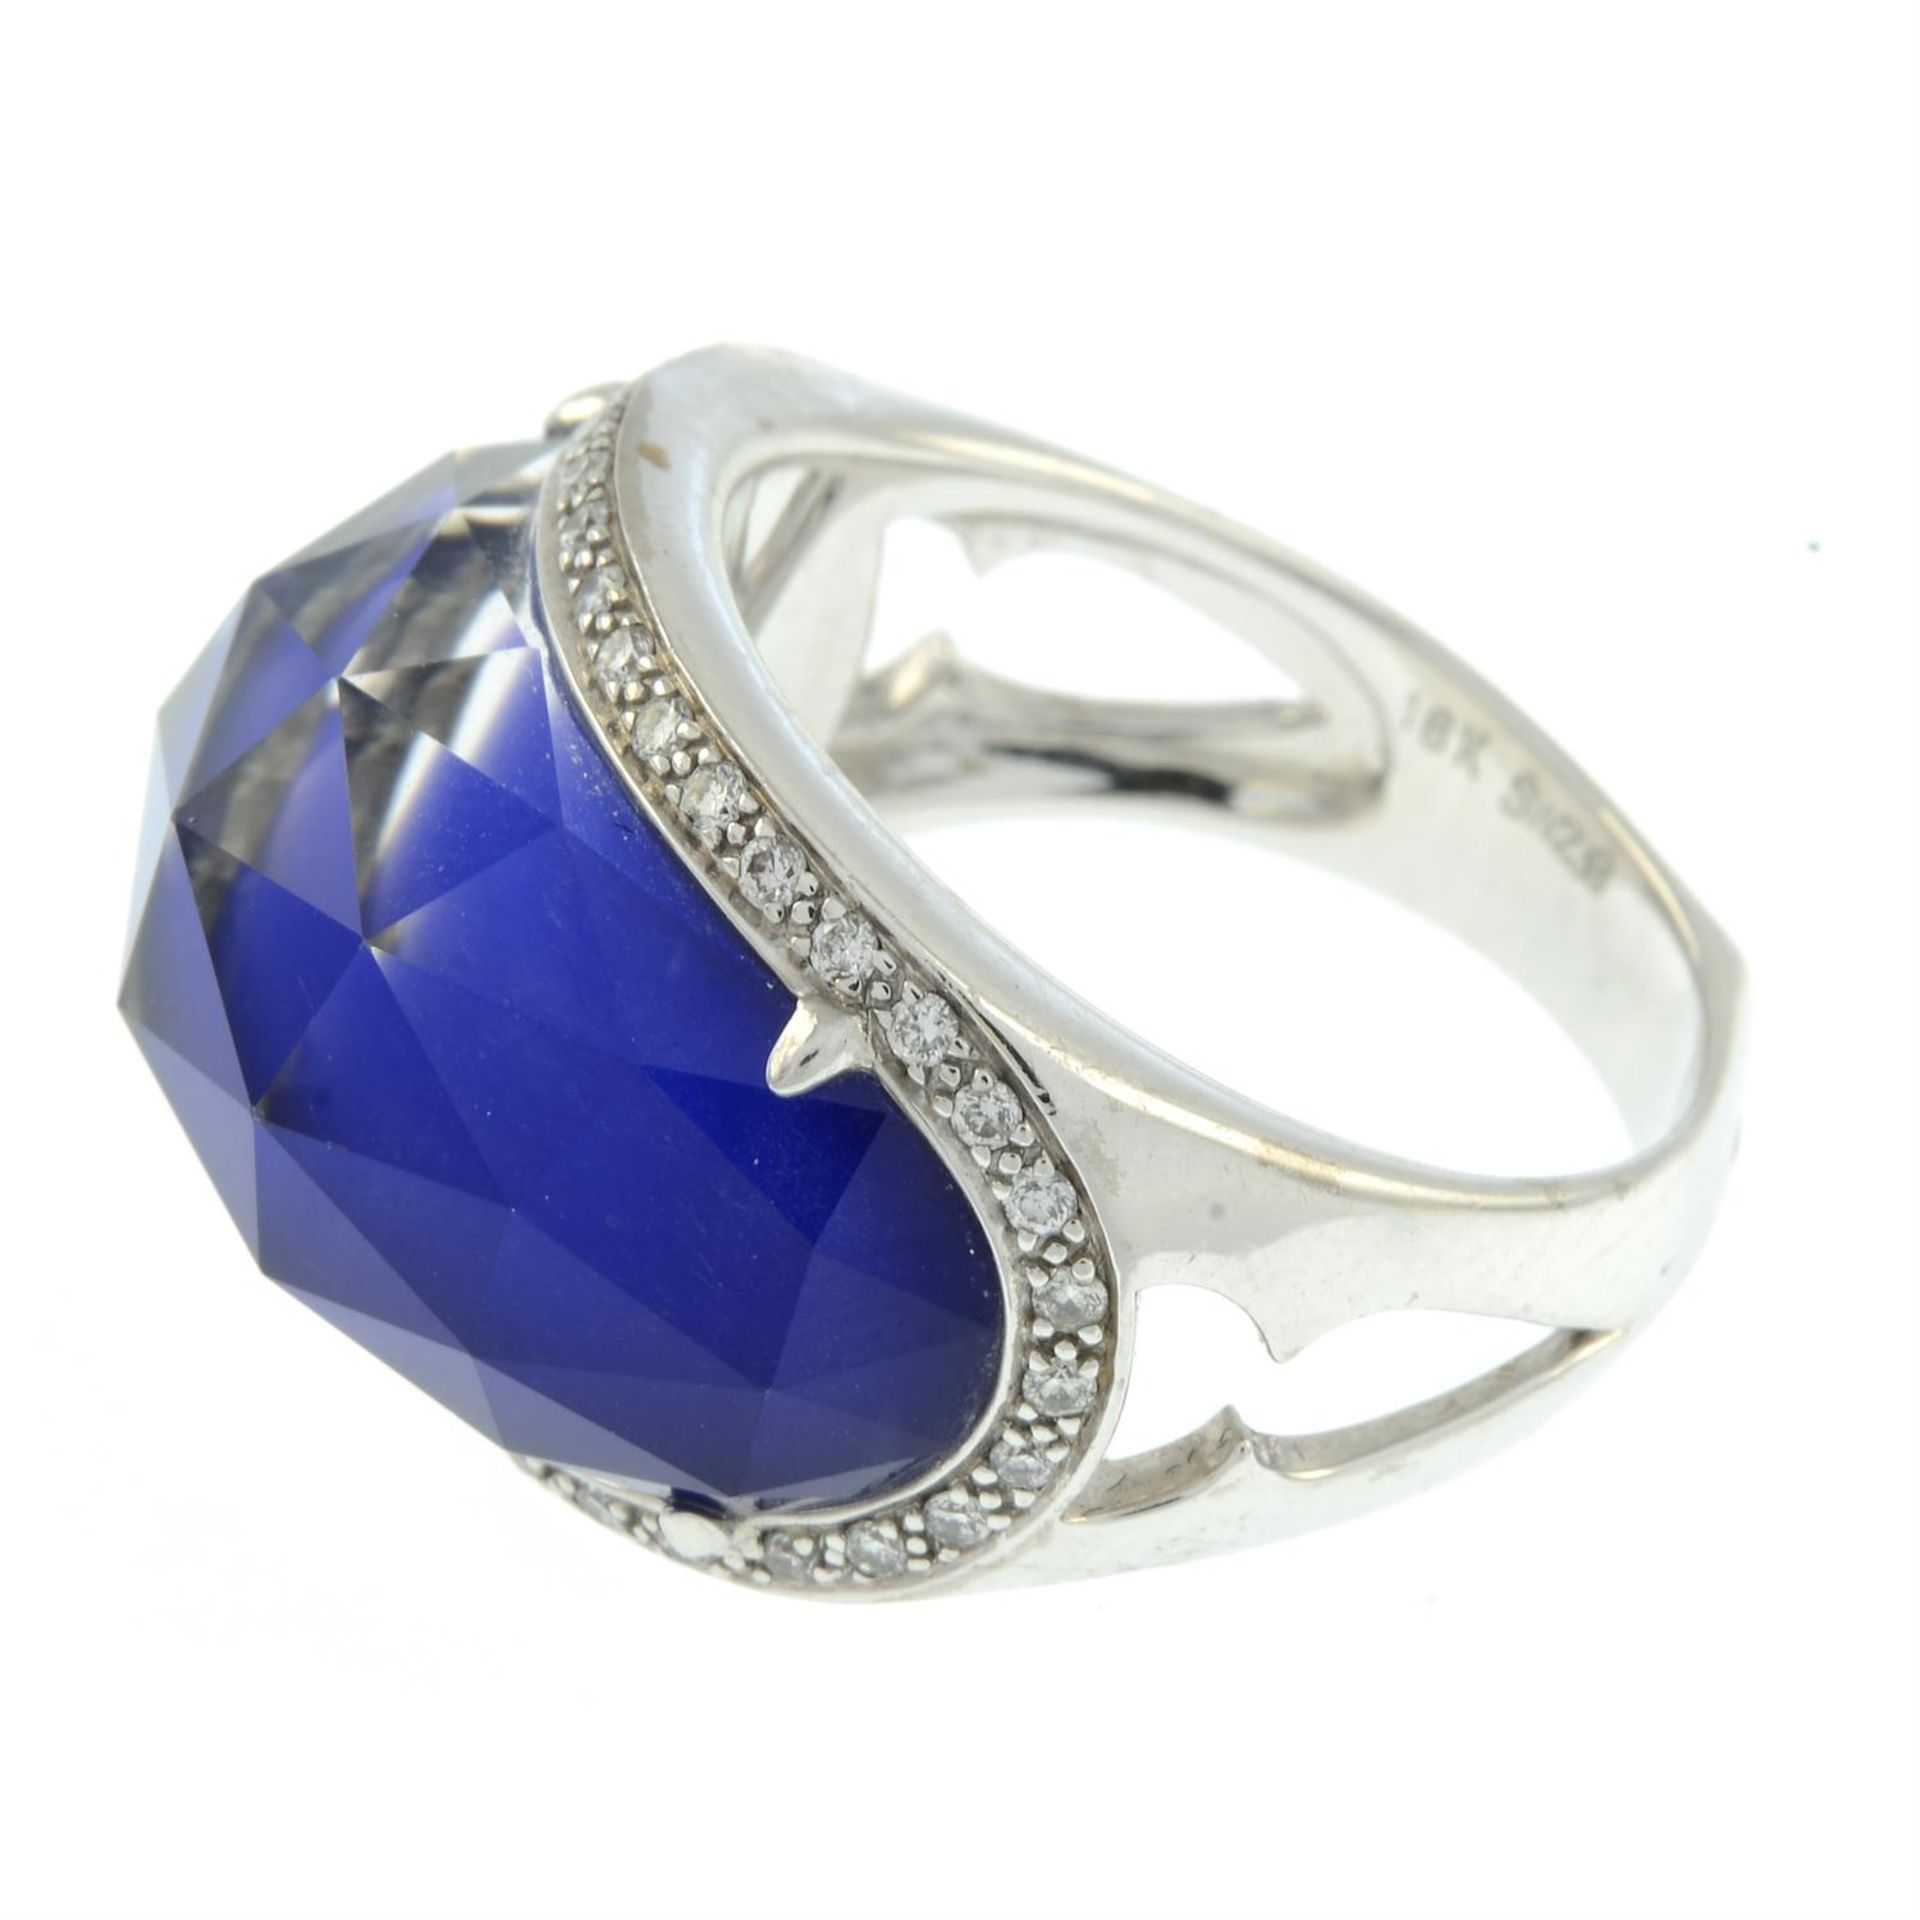 An 18ct gold brilliant-cut diamond and blue 'Crystal Haze' ring, by Stephen Webster. - Image 4 of 5